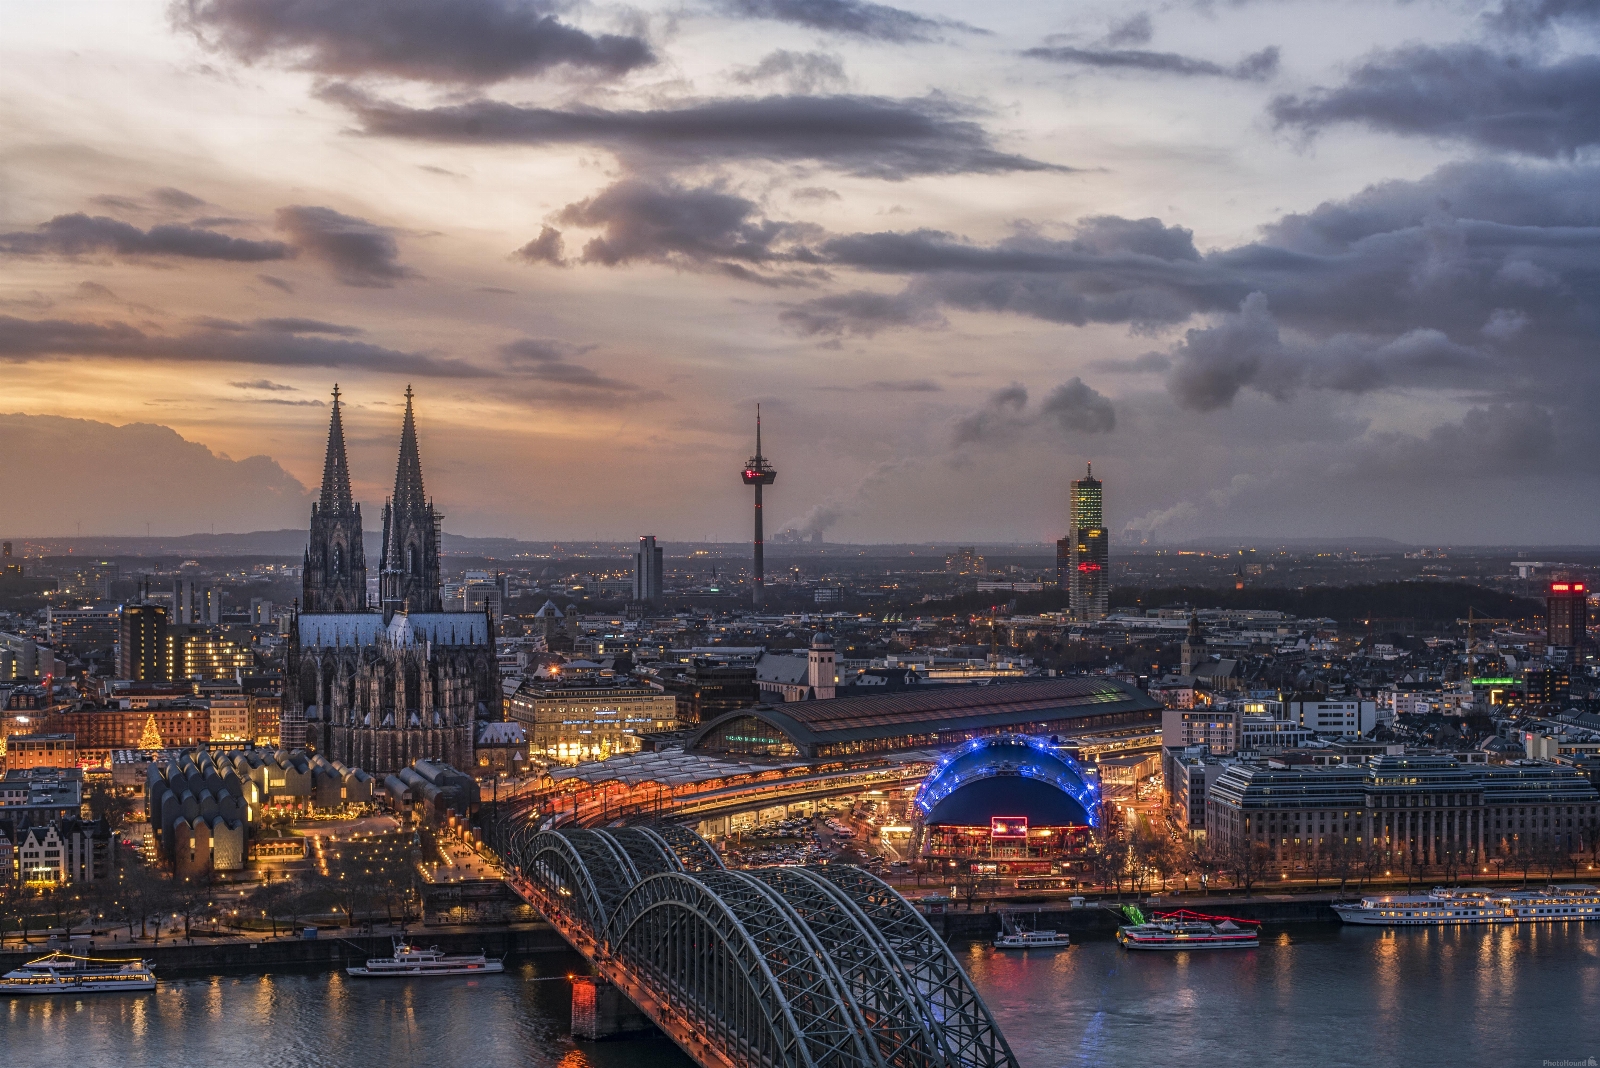 Image of View from Köln Triangle by Rana Jabeen